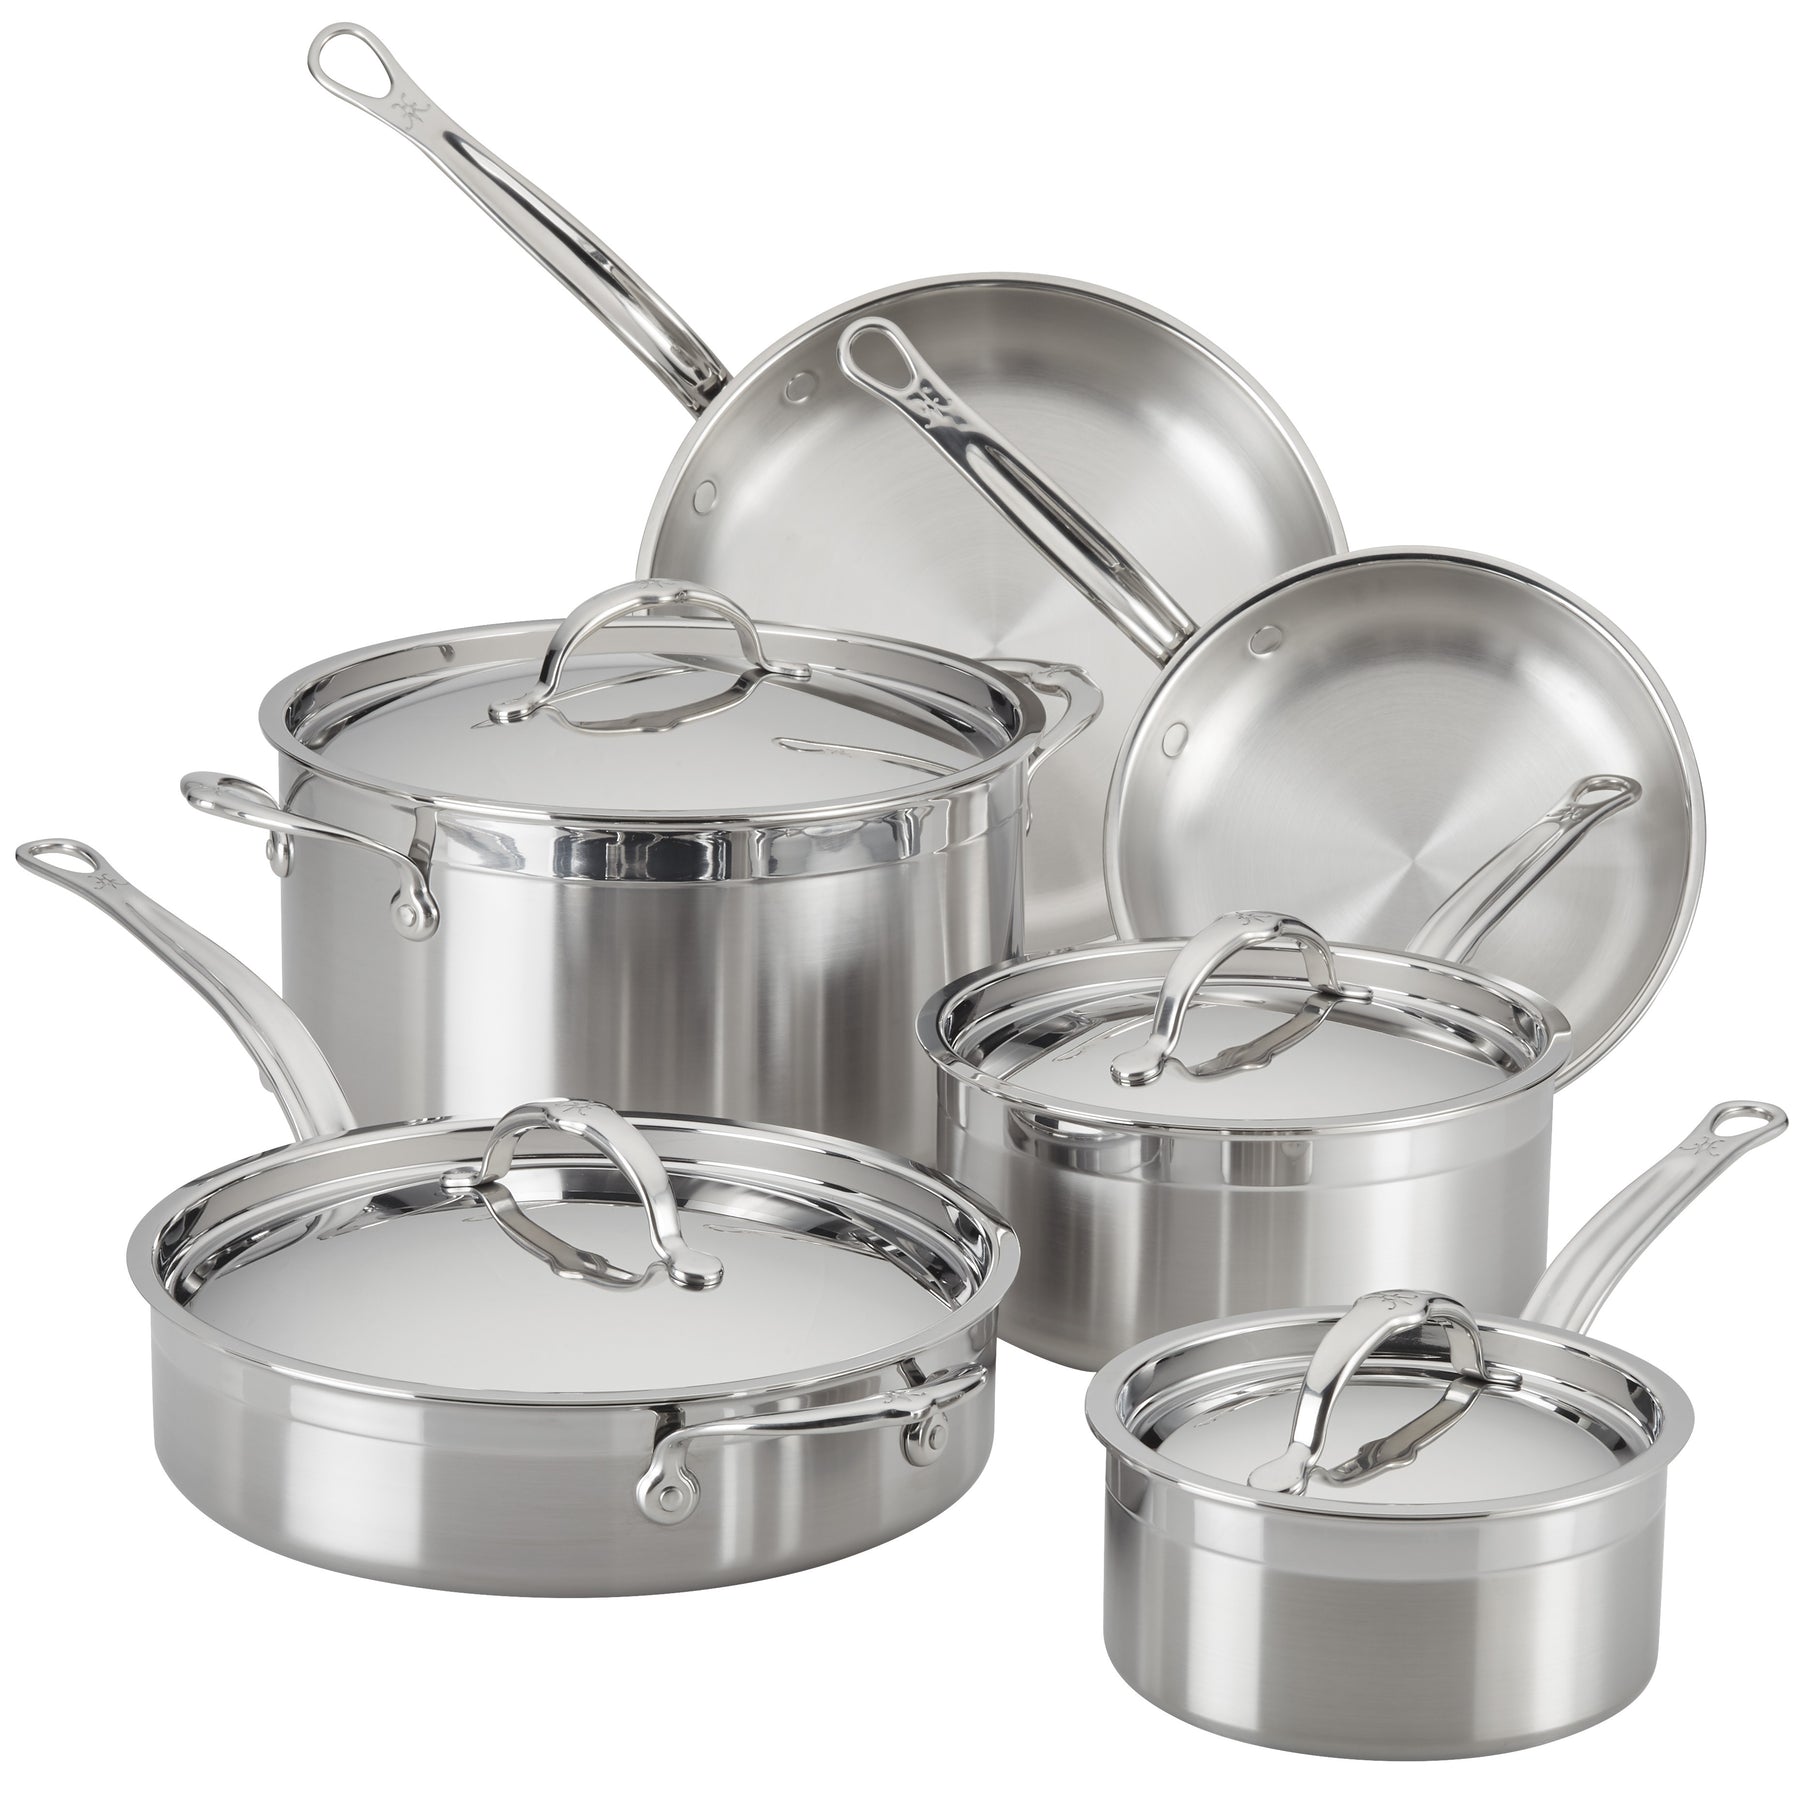 Nickel Free Stainless Steel Pots and Pans Set - Healthy Cookware Set Stainless  Steel - Non-Toxic Induction Cookware Sets - China Cookware and Stainless  Steel Cookware price